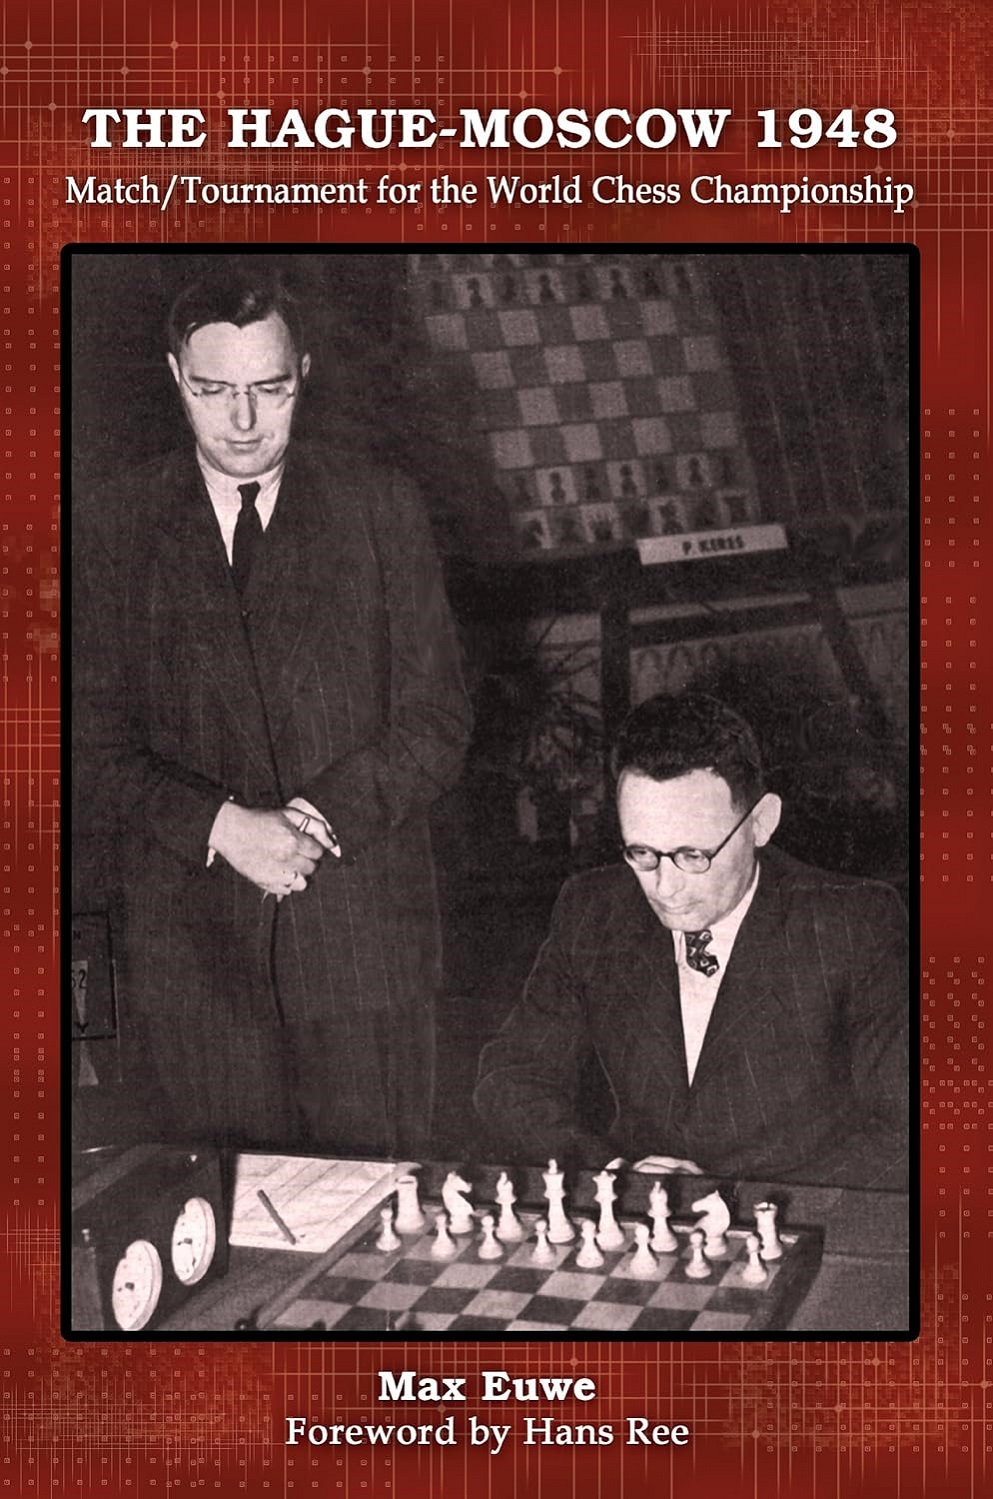 Match Tournament for the World Chess Championship The Hague-Moscow 1948. 9788672971392